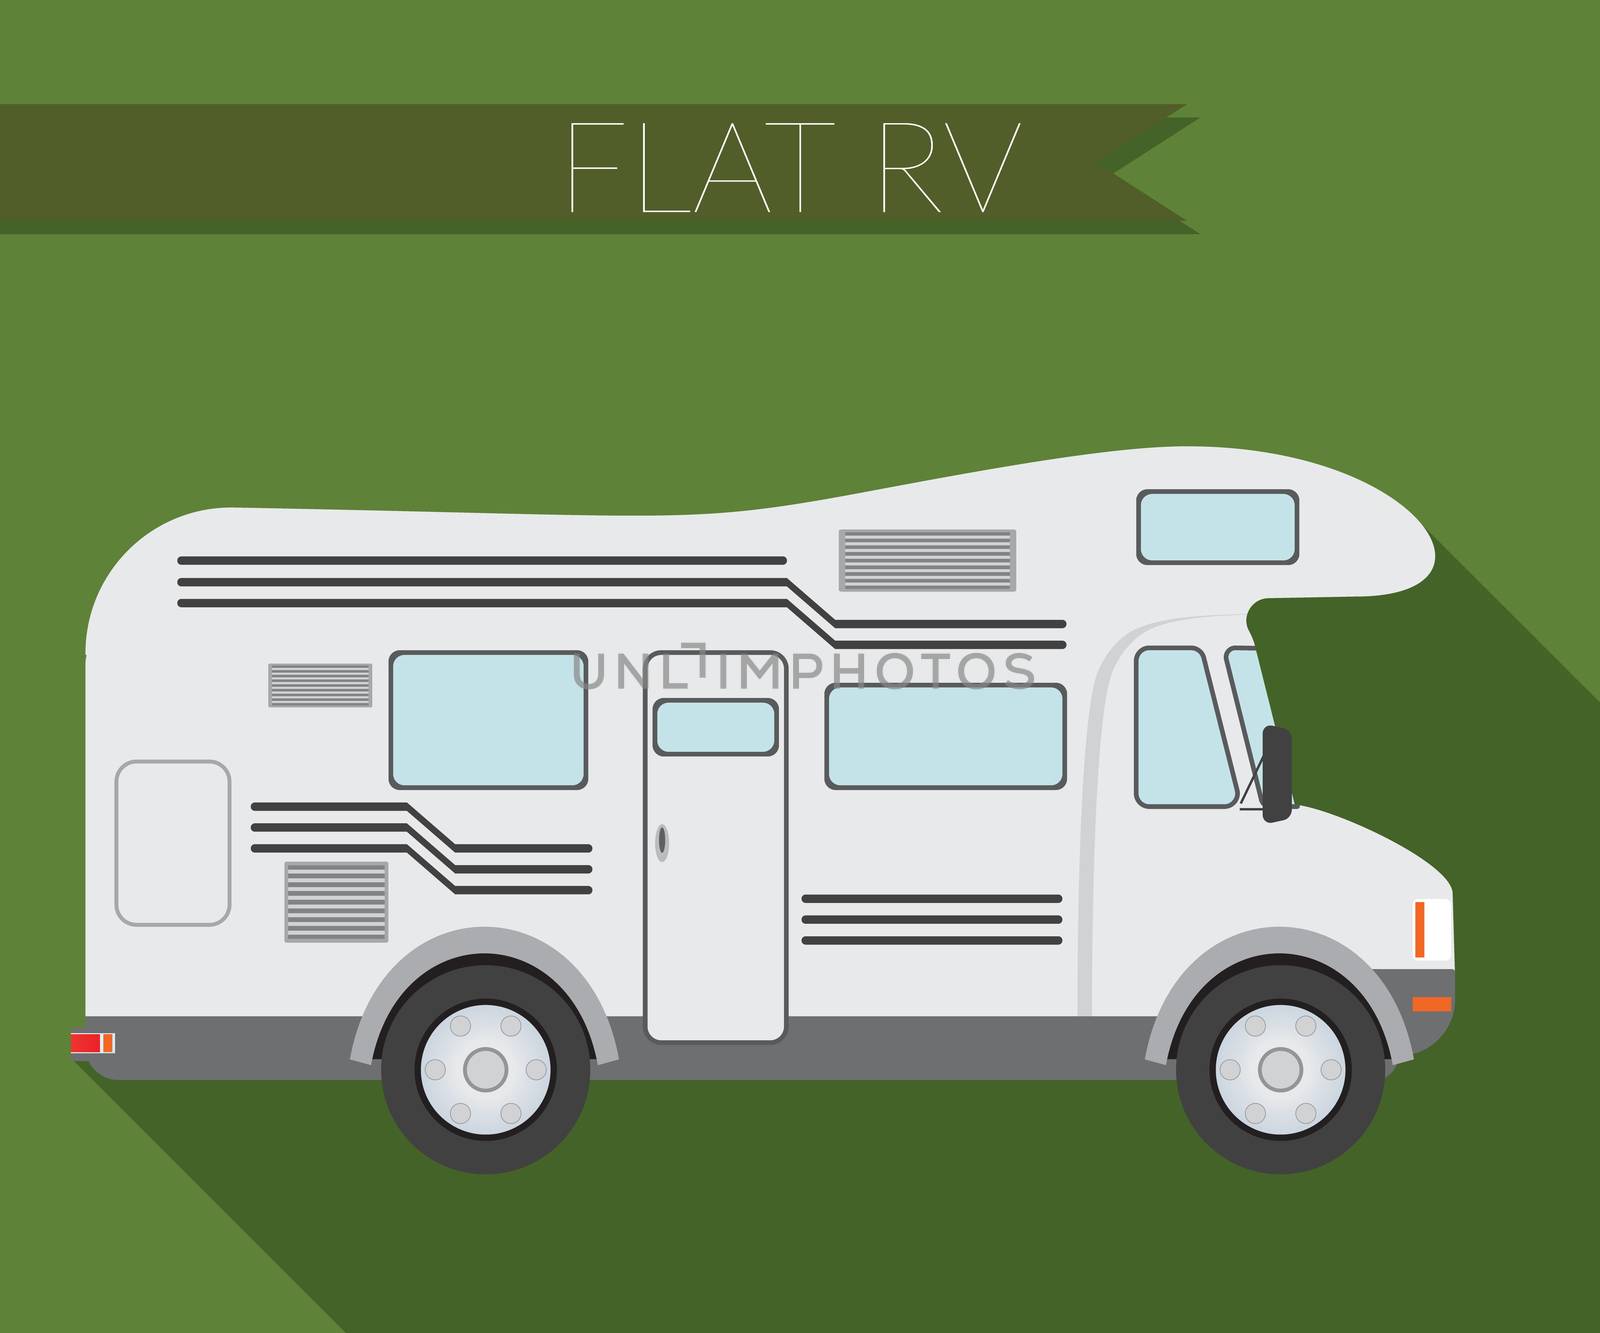 Flat design vector illustration city Transportation, RV for travel and camping, side view.